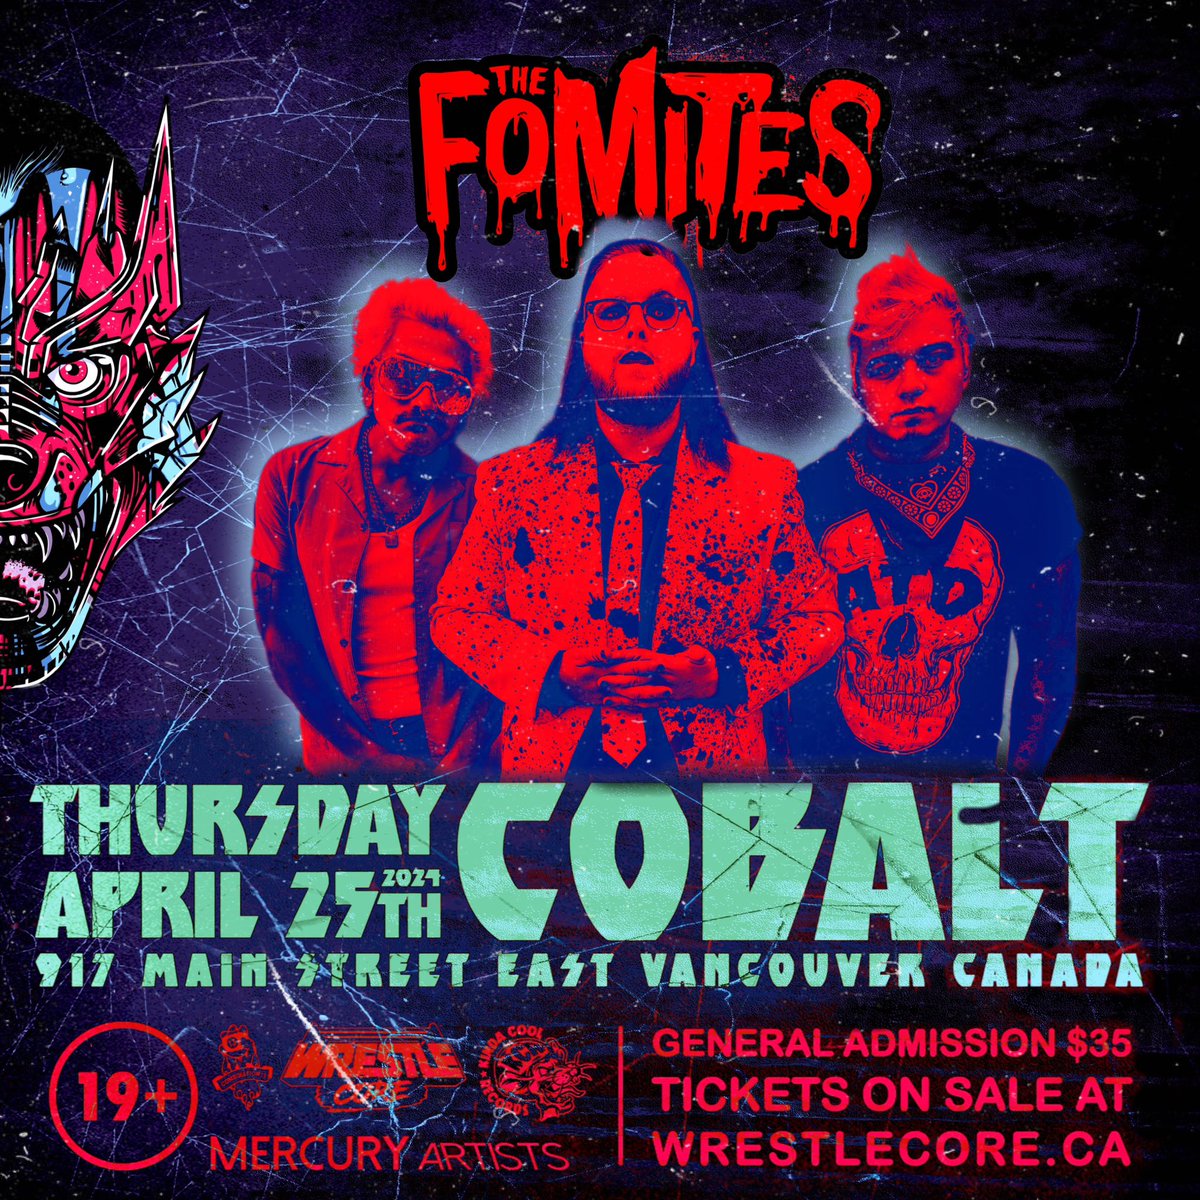 Visit @Do604 for a chance to win FREE TIX to the @TheCobalt_van featuring @monsterwolfband the Fomites & Vachteria along with appearances by @TheRealShreddZ @VillainTaraZep @PufTheWrestler @TFAwrestling & @FightKobraKai